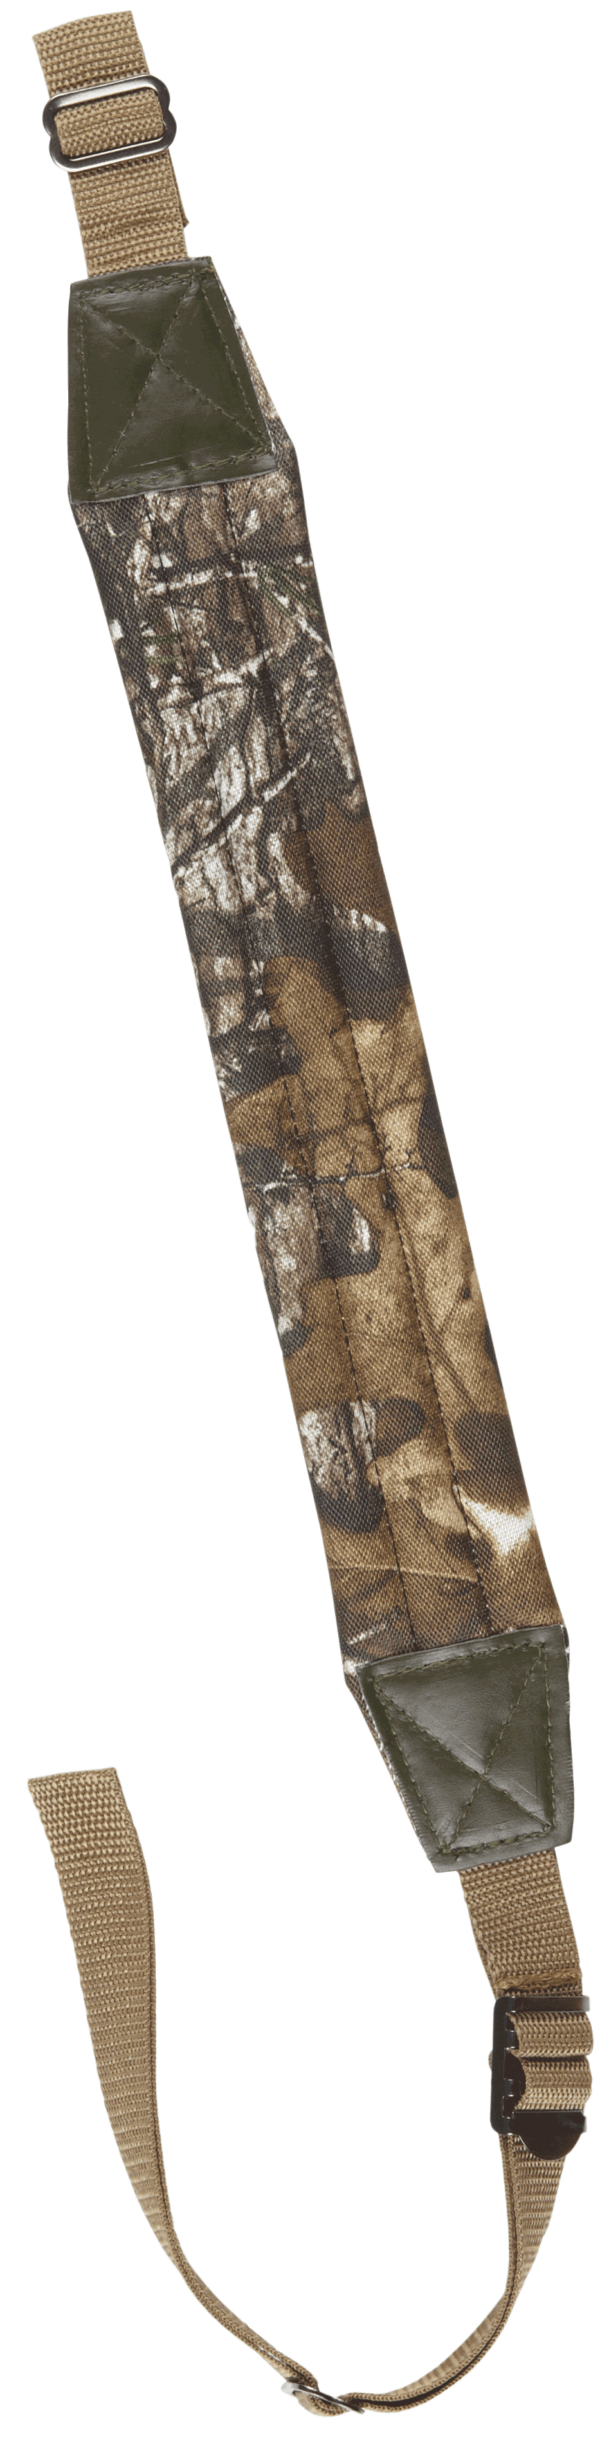 Bulldog BD815 Deluxe Sling made of Realtree Xtra Nylon with 1″ W & Padded Design for Rifles